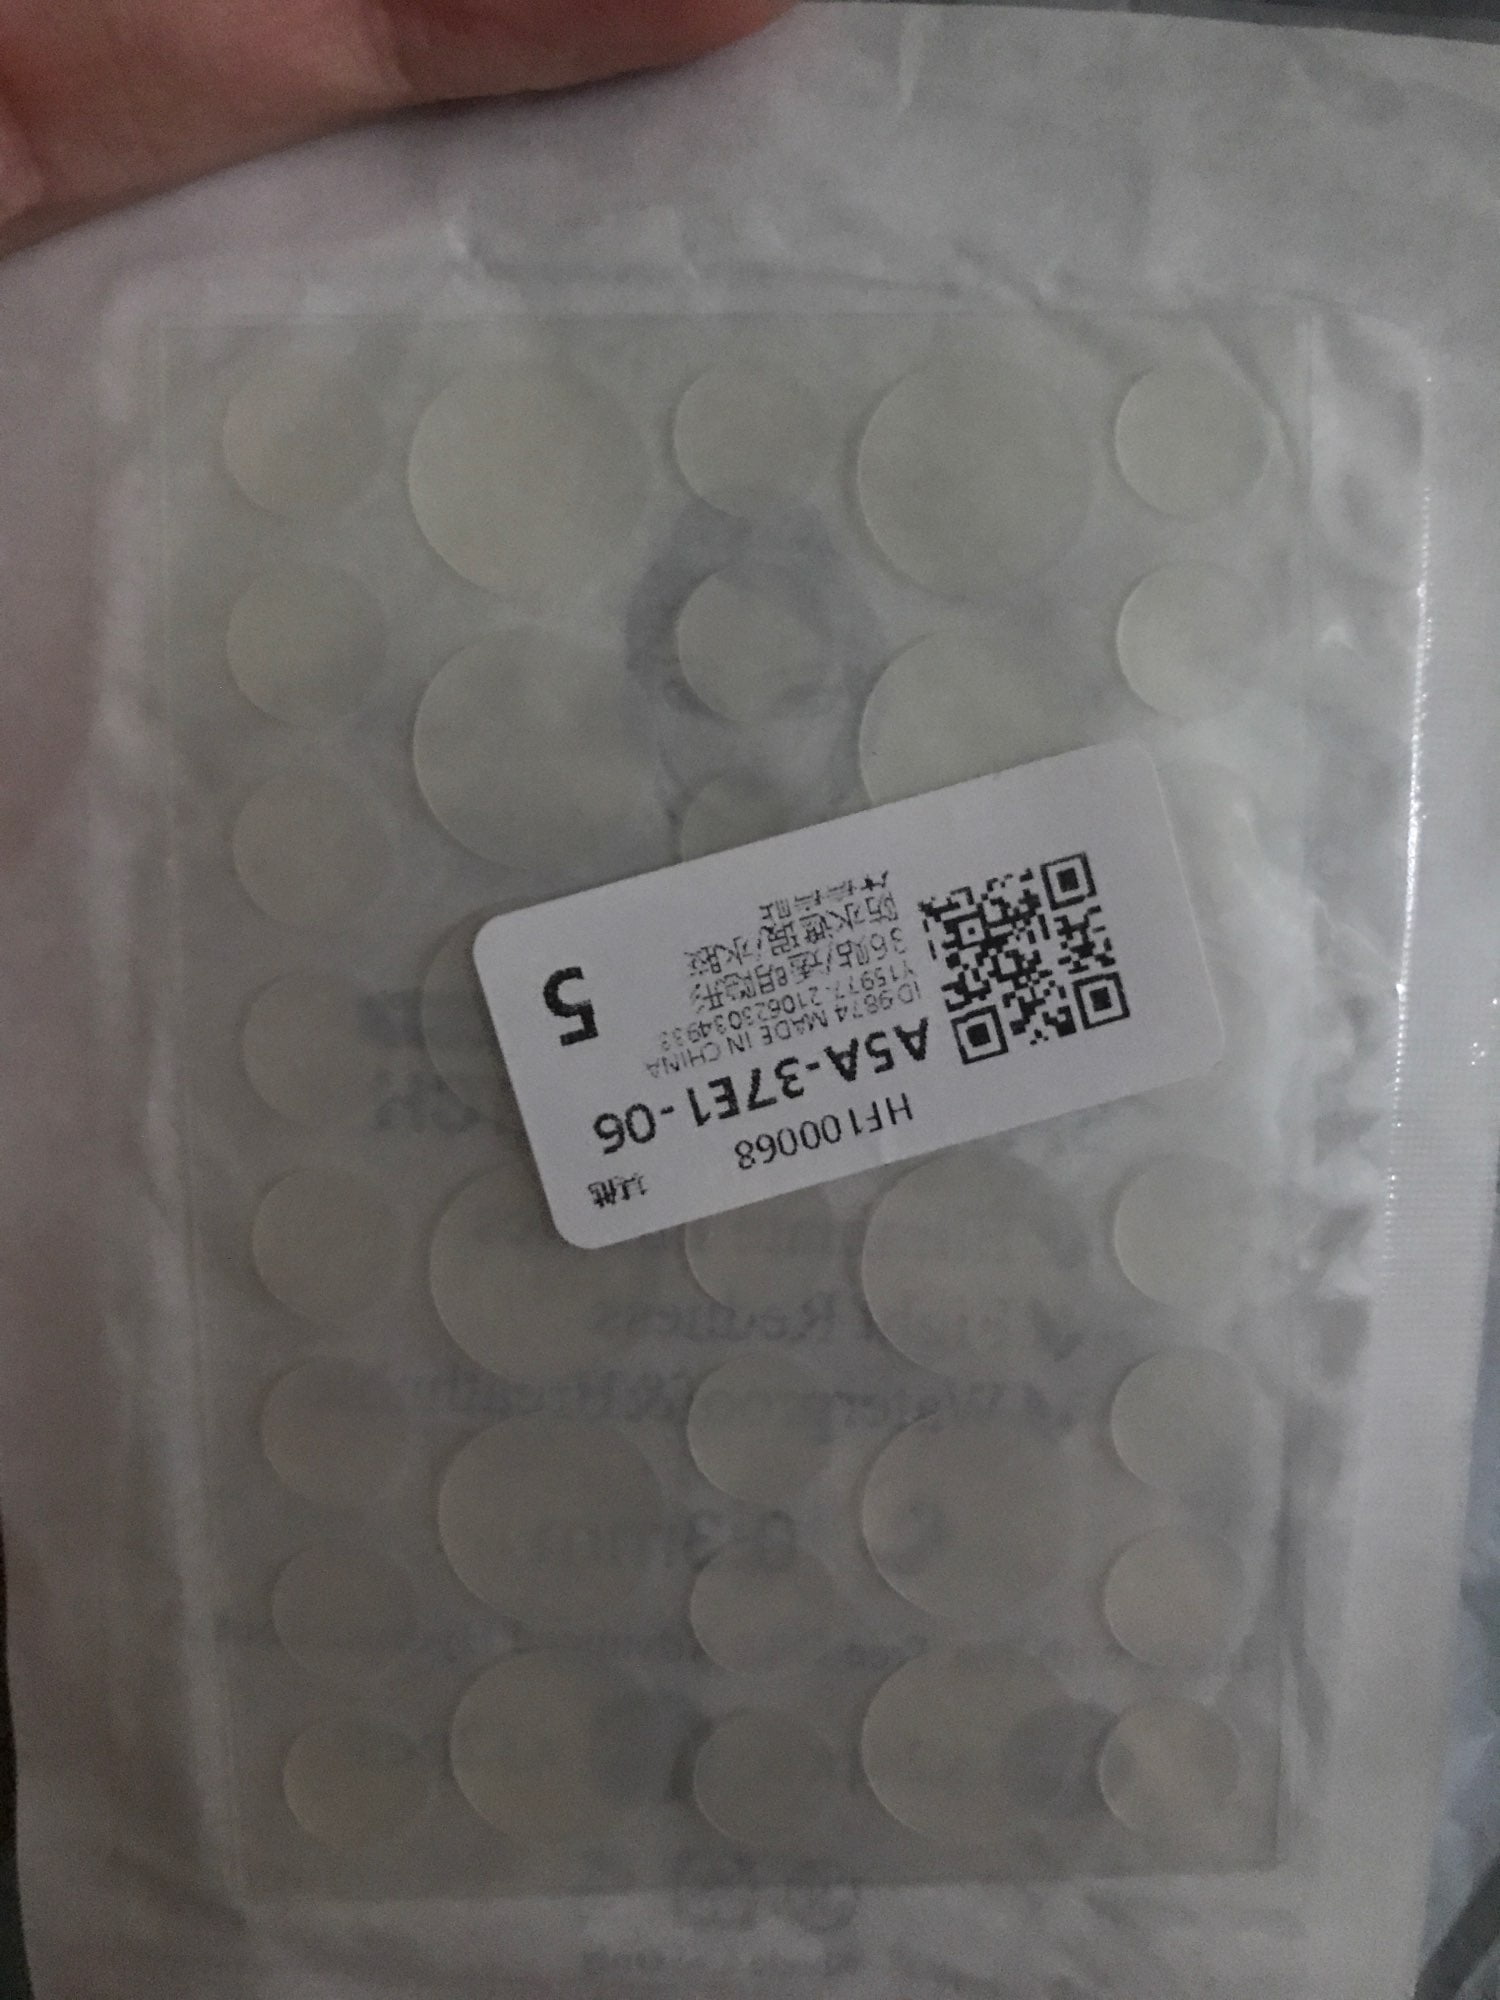 Skin Tag Remover Patch photo review